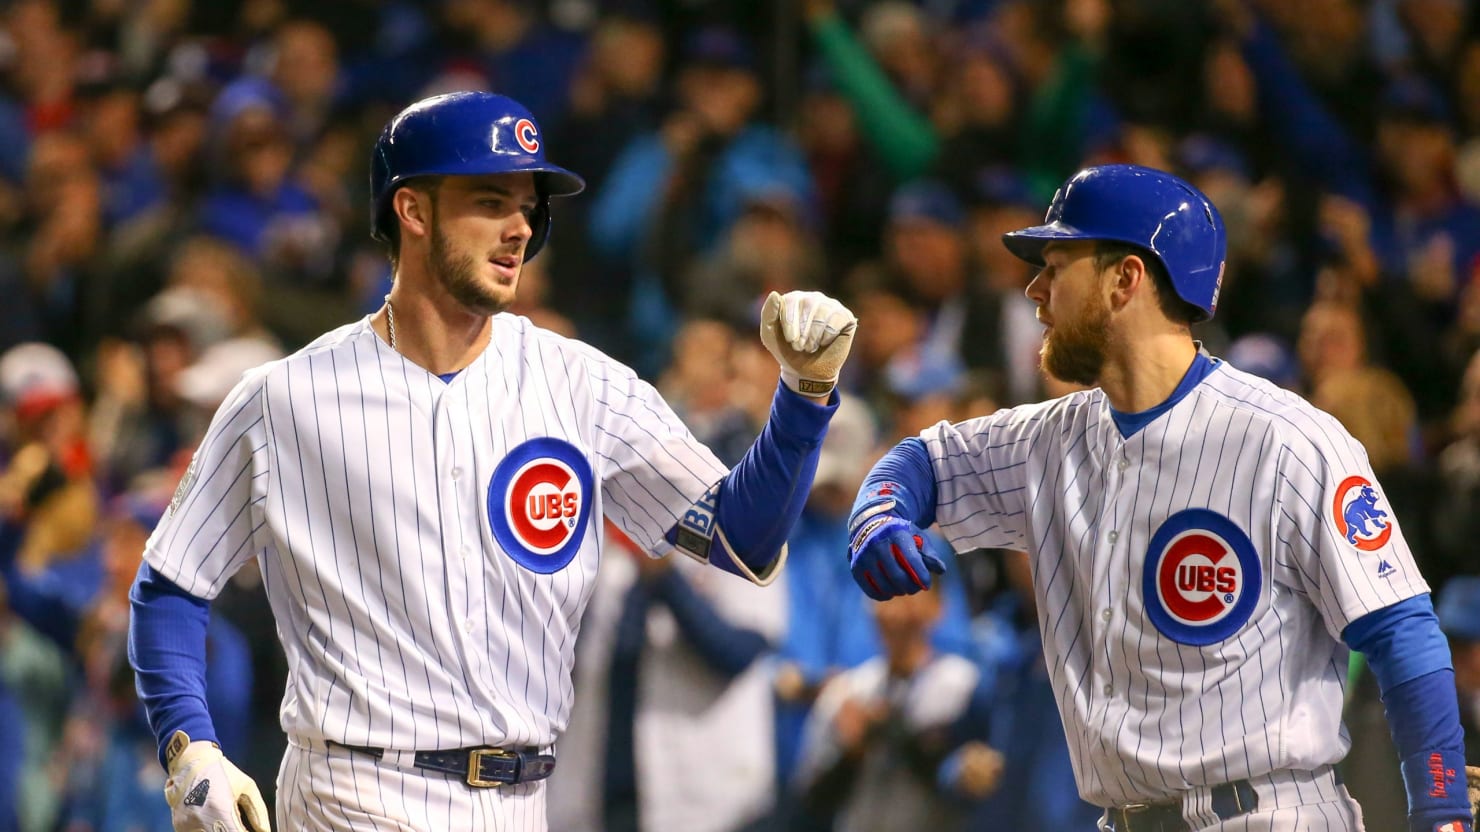 Game 7 2016 World Series: Chicago Cubs vs. Cleveland Indians Live Stream and Full Schedule